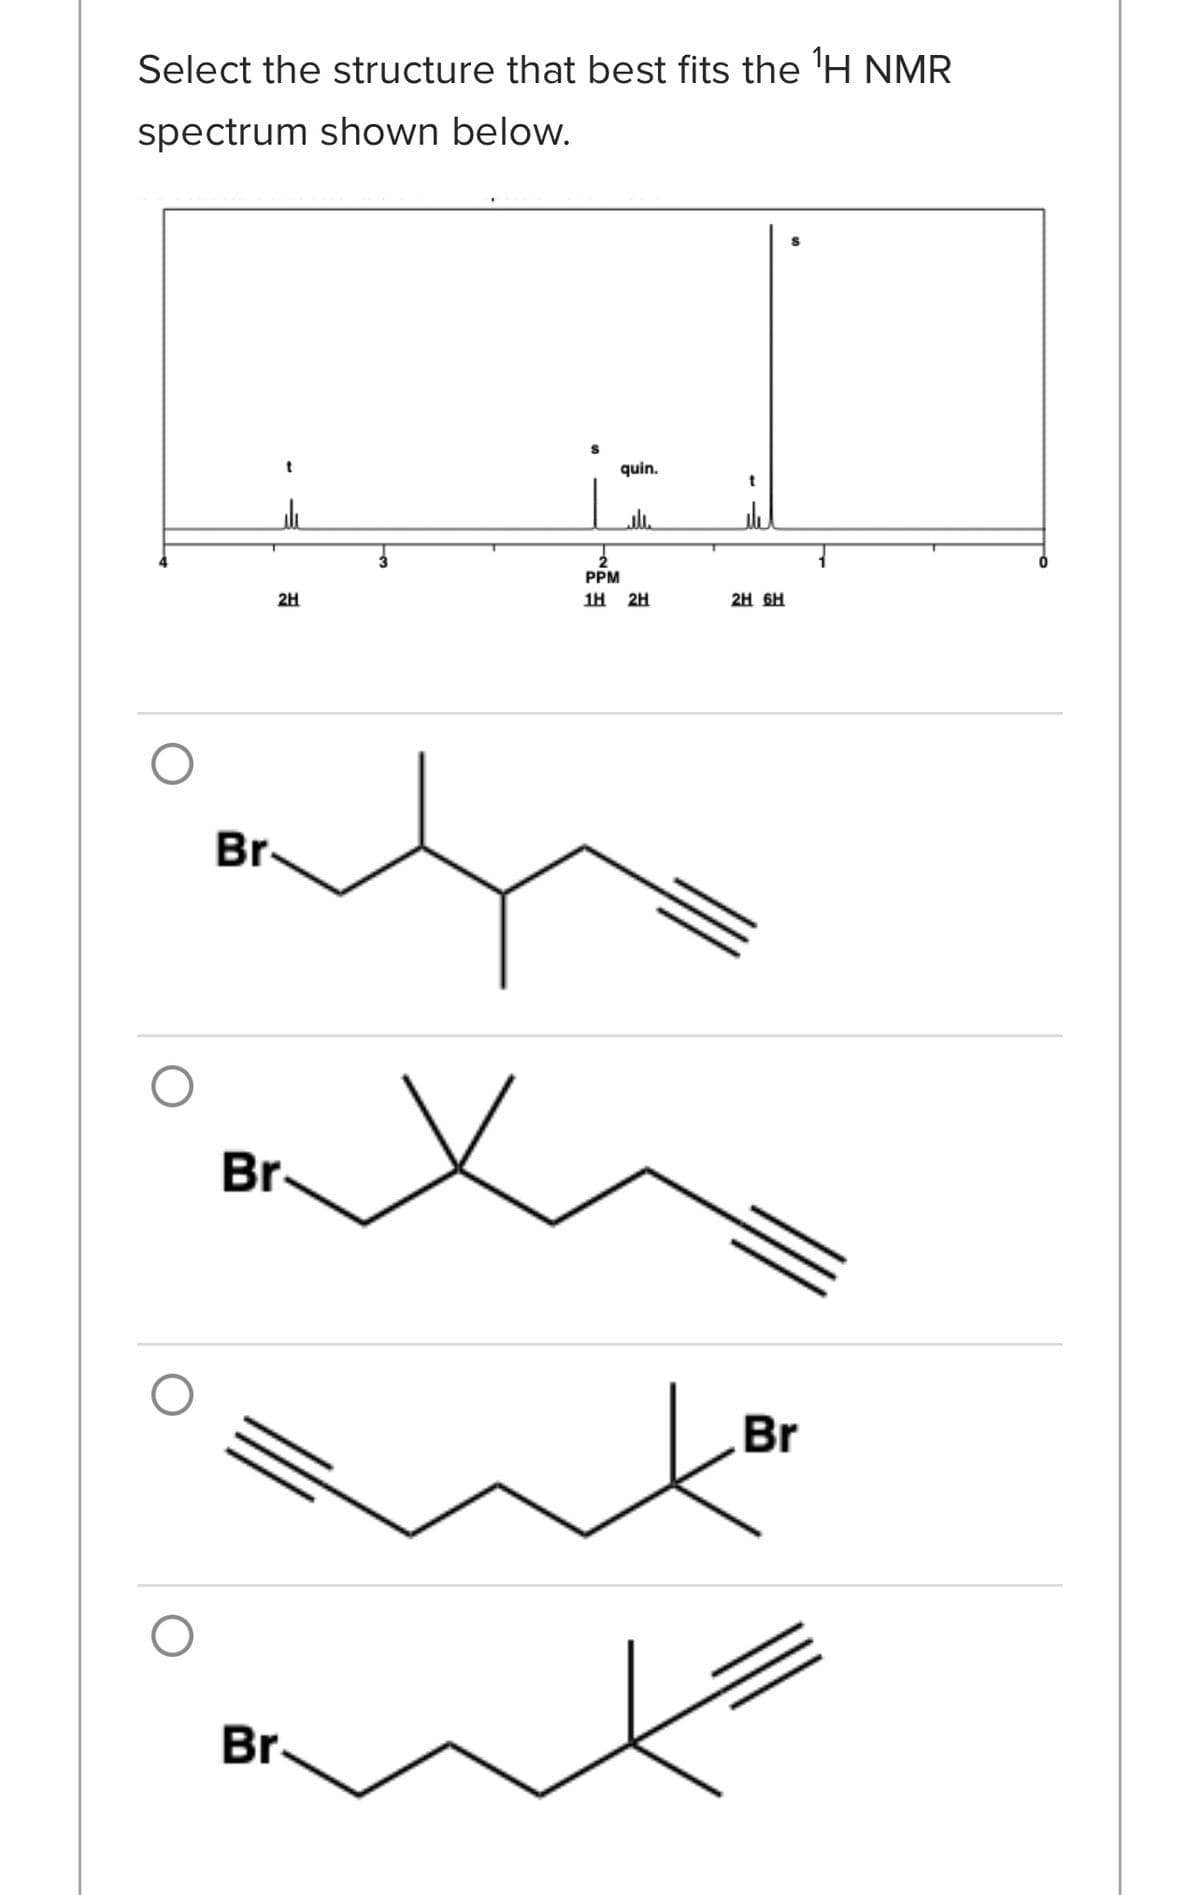 Select the structure that best fits the ¹H NMR
spectrum shown below.
2H
Br.
Br
Br
quin.
PPM
1H 2H
x
2H 6H
Br